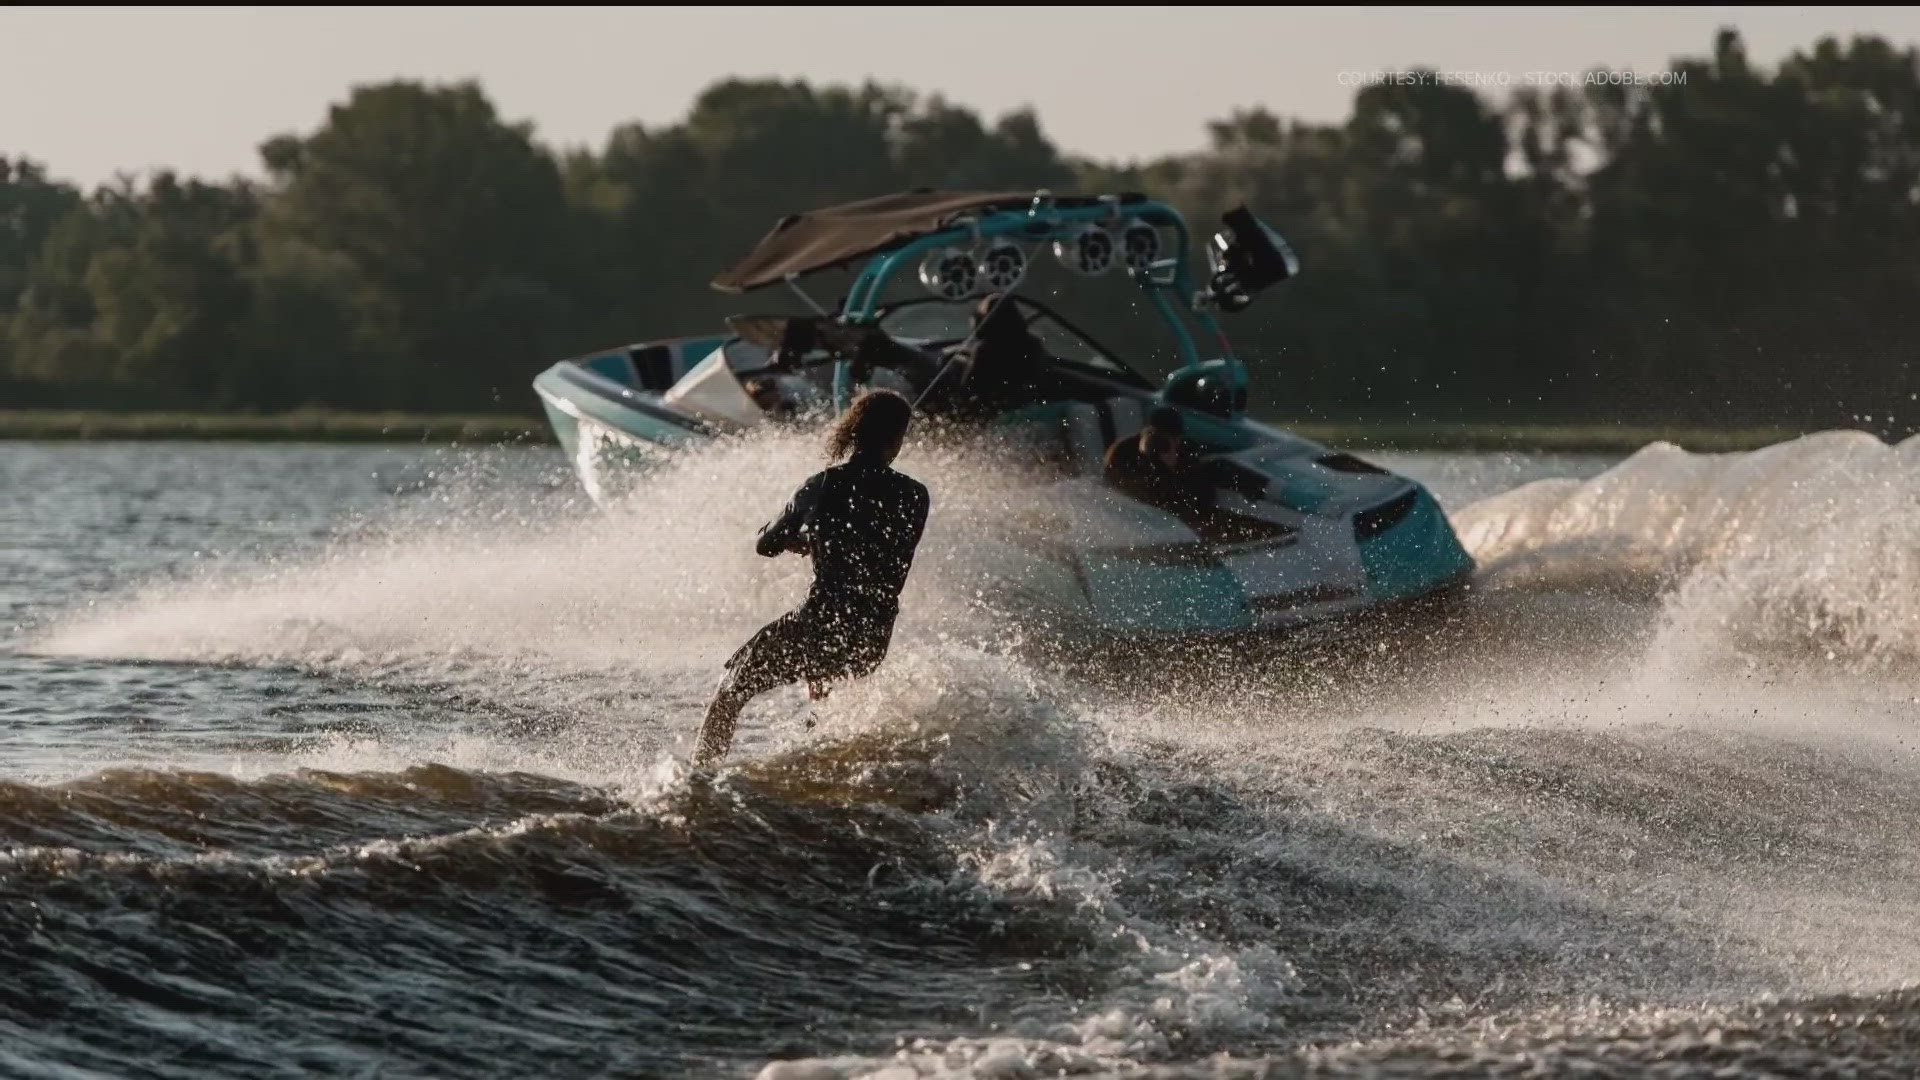 There's a new Georgia law about to take effect, which will impact wake boarding.